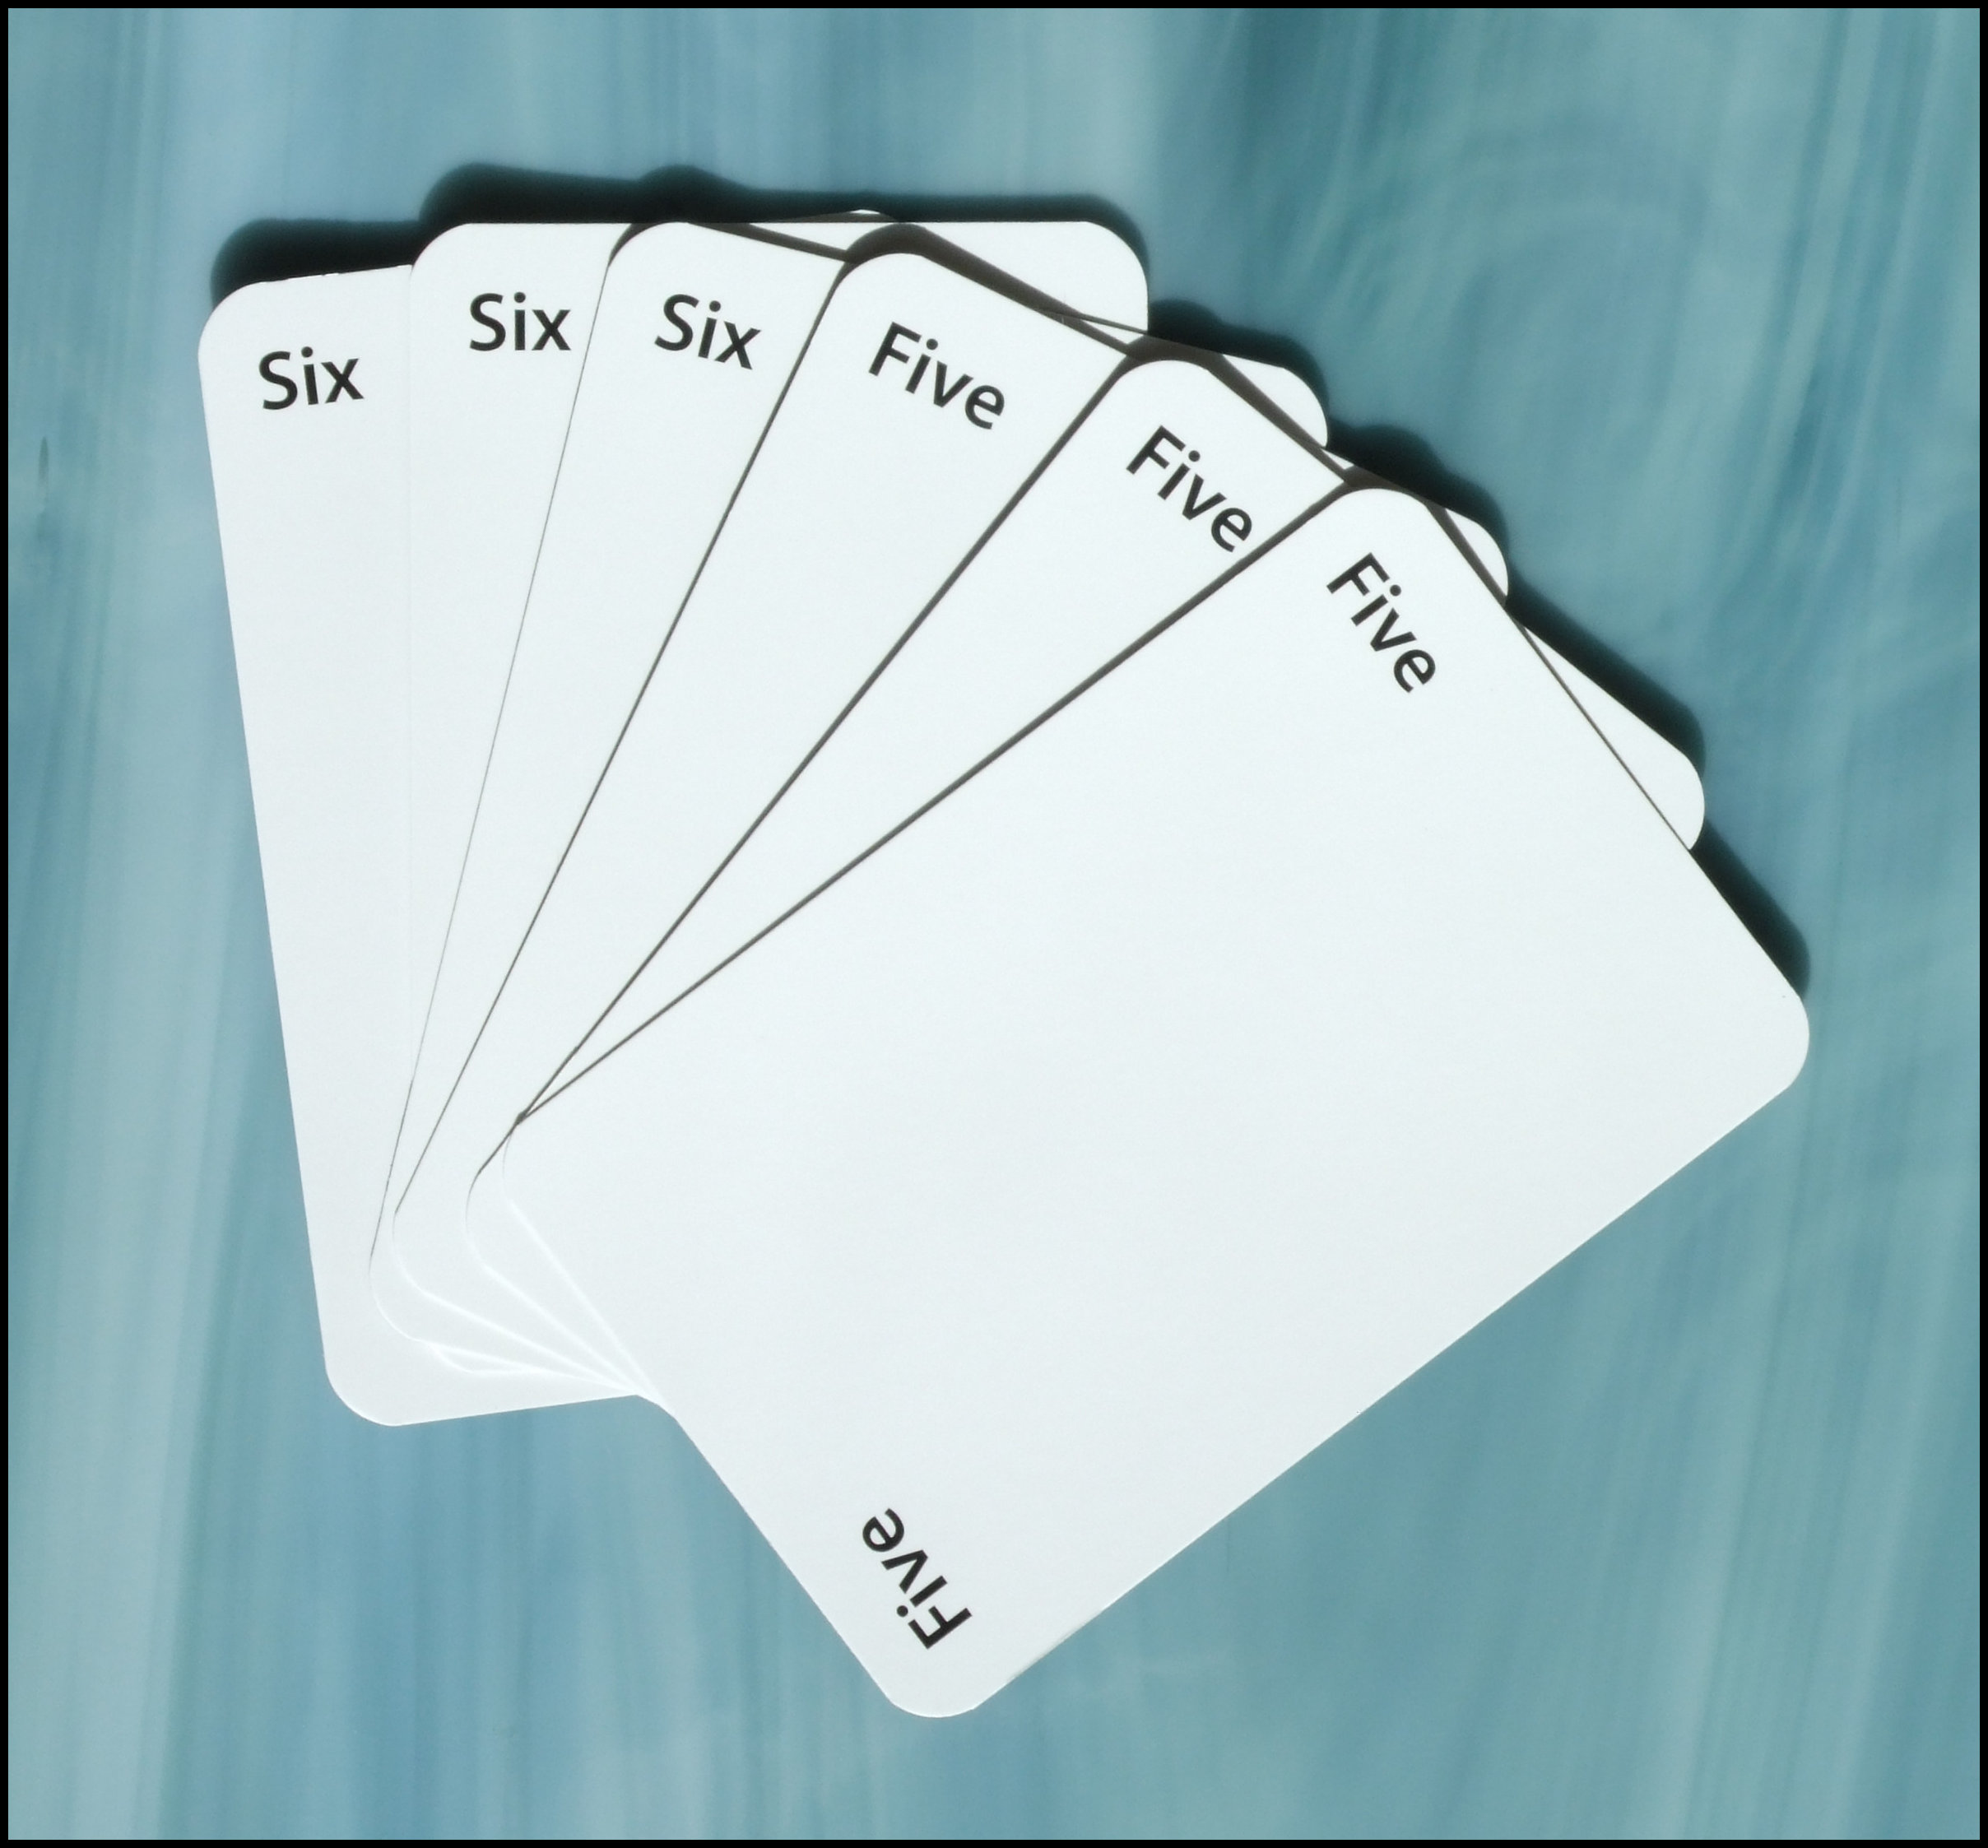 Termination Incorporated - Five And Six Cards